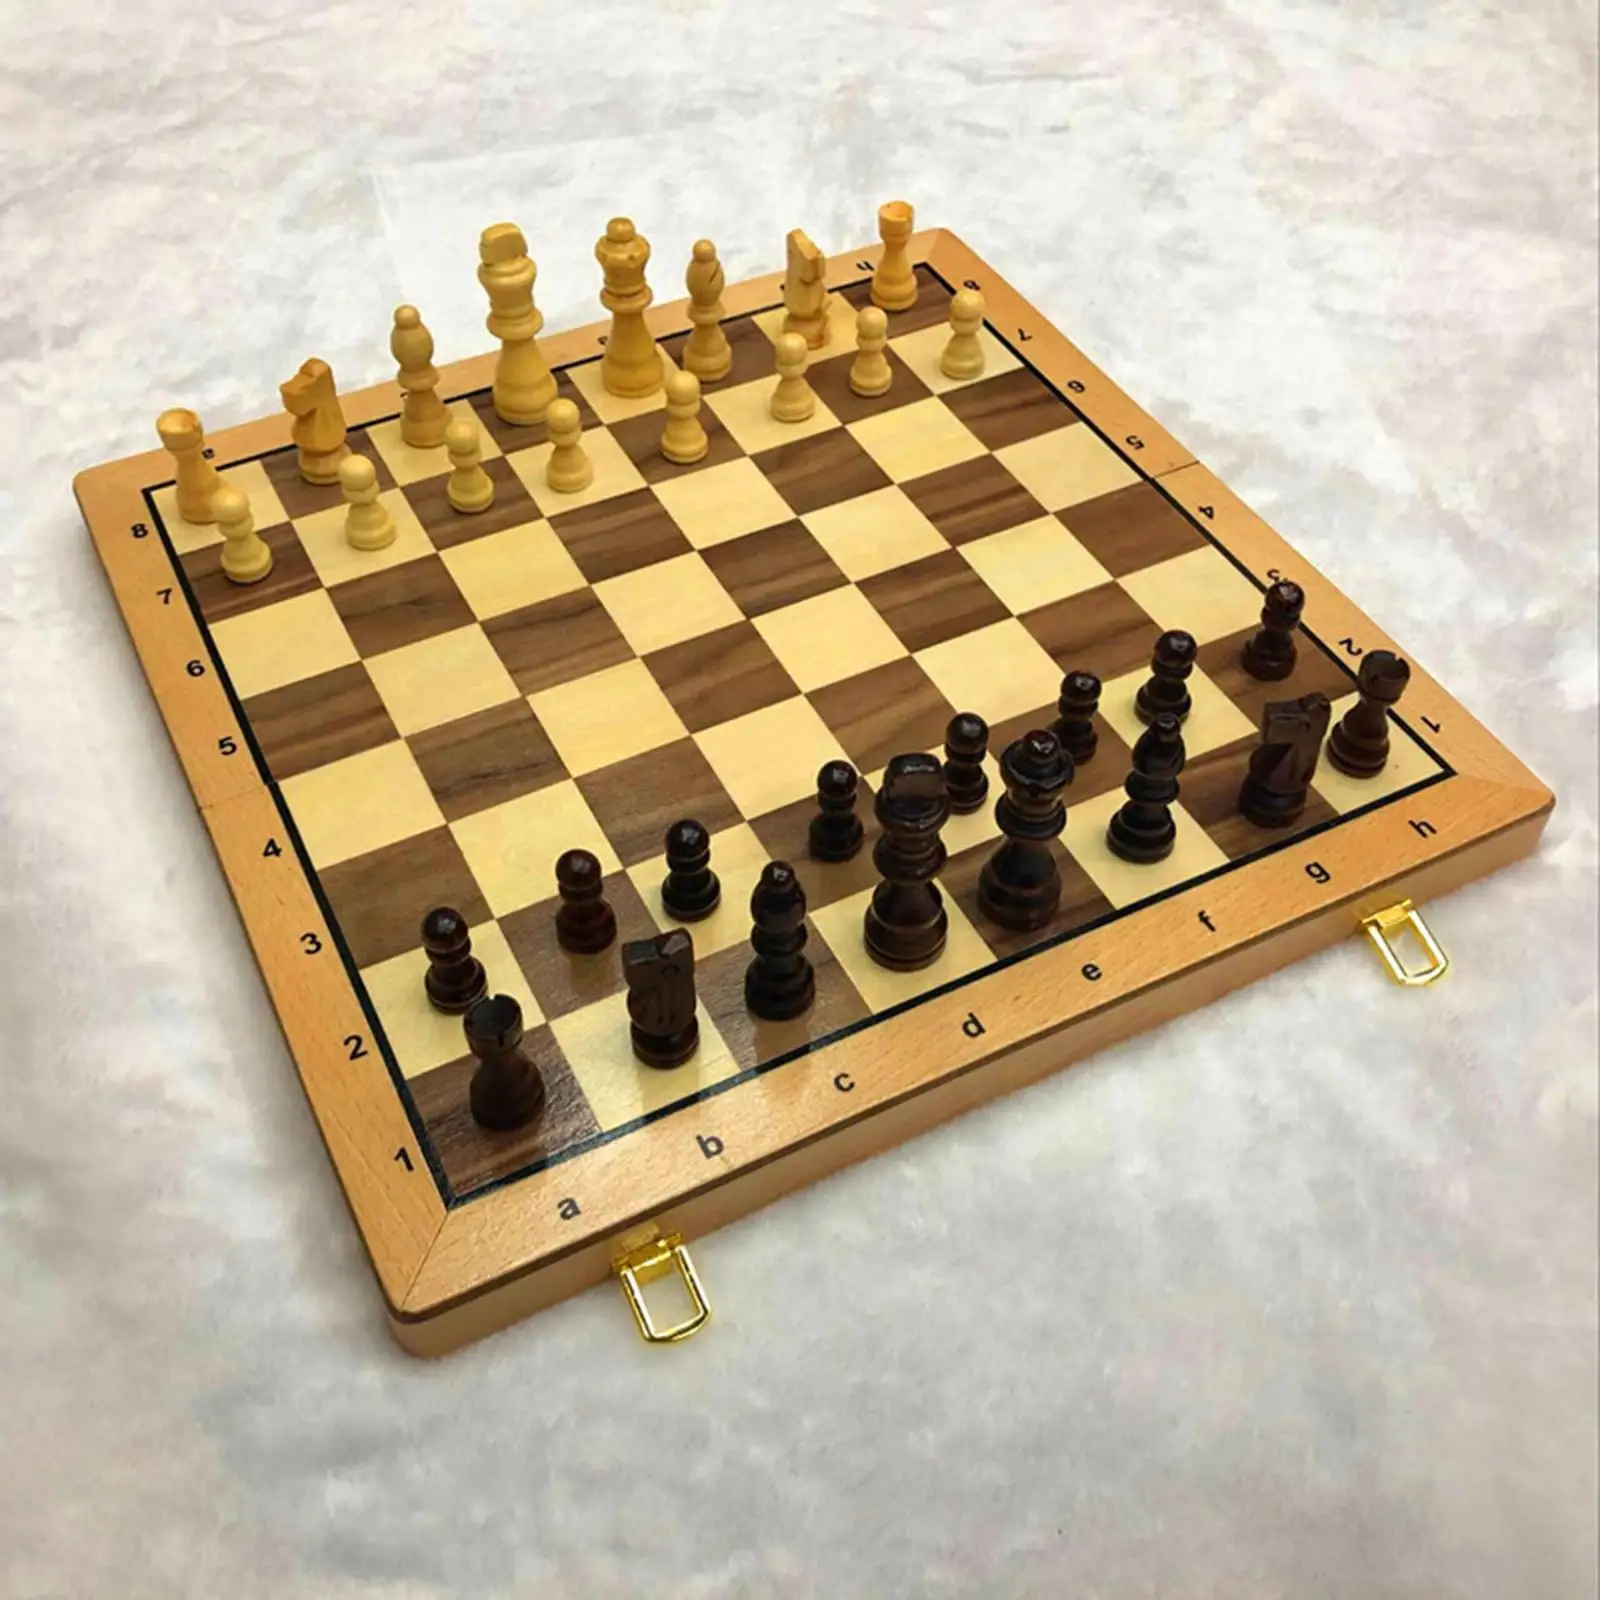 15 Inches Wooden Chess Set - Folding Board, Handmade Portable Travel Chess Board  with Game Pieces  Beginner Chess Set for Kids